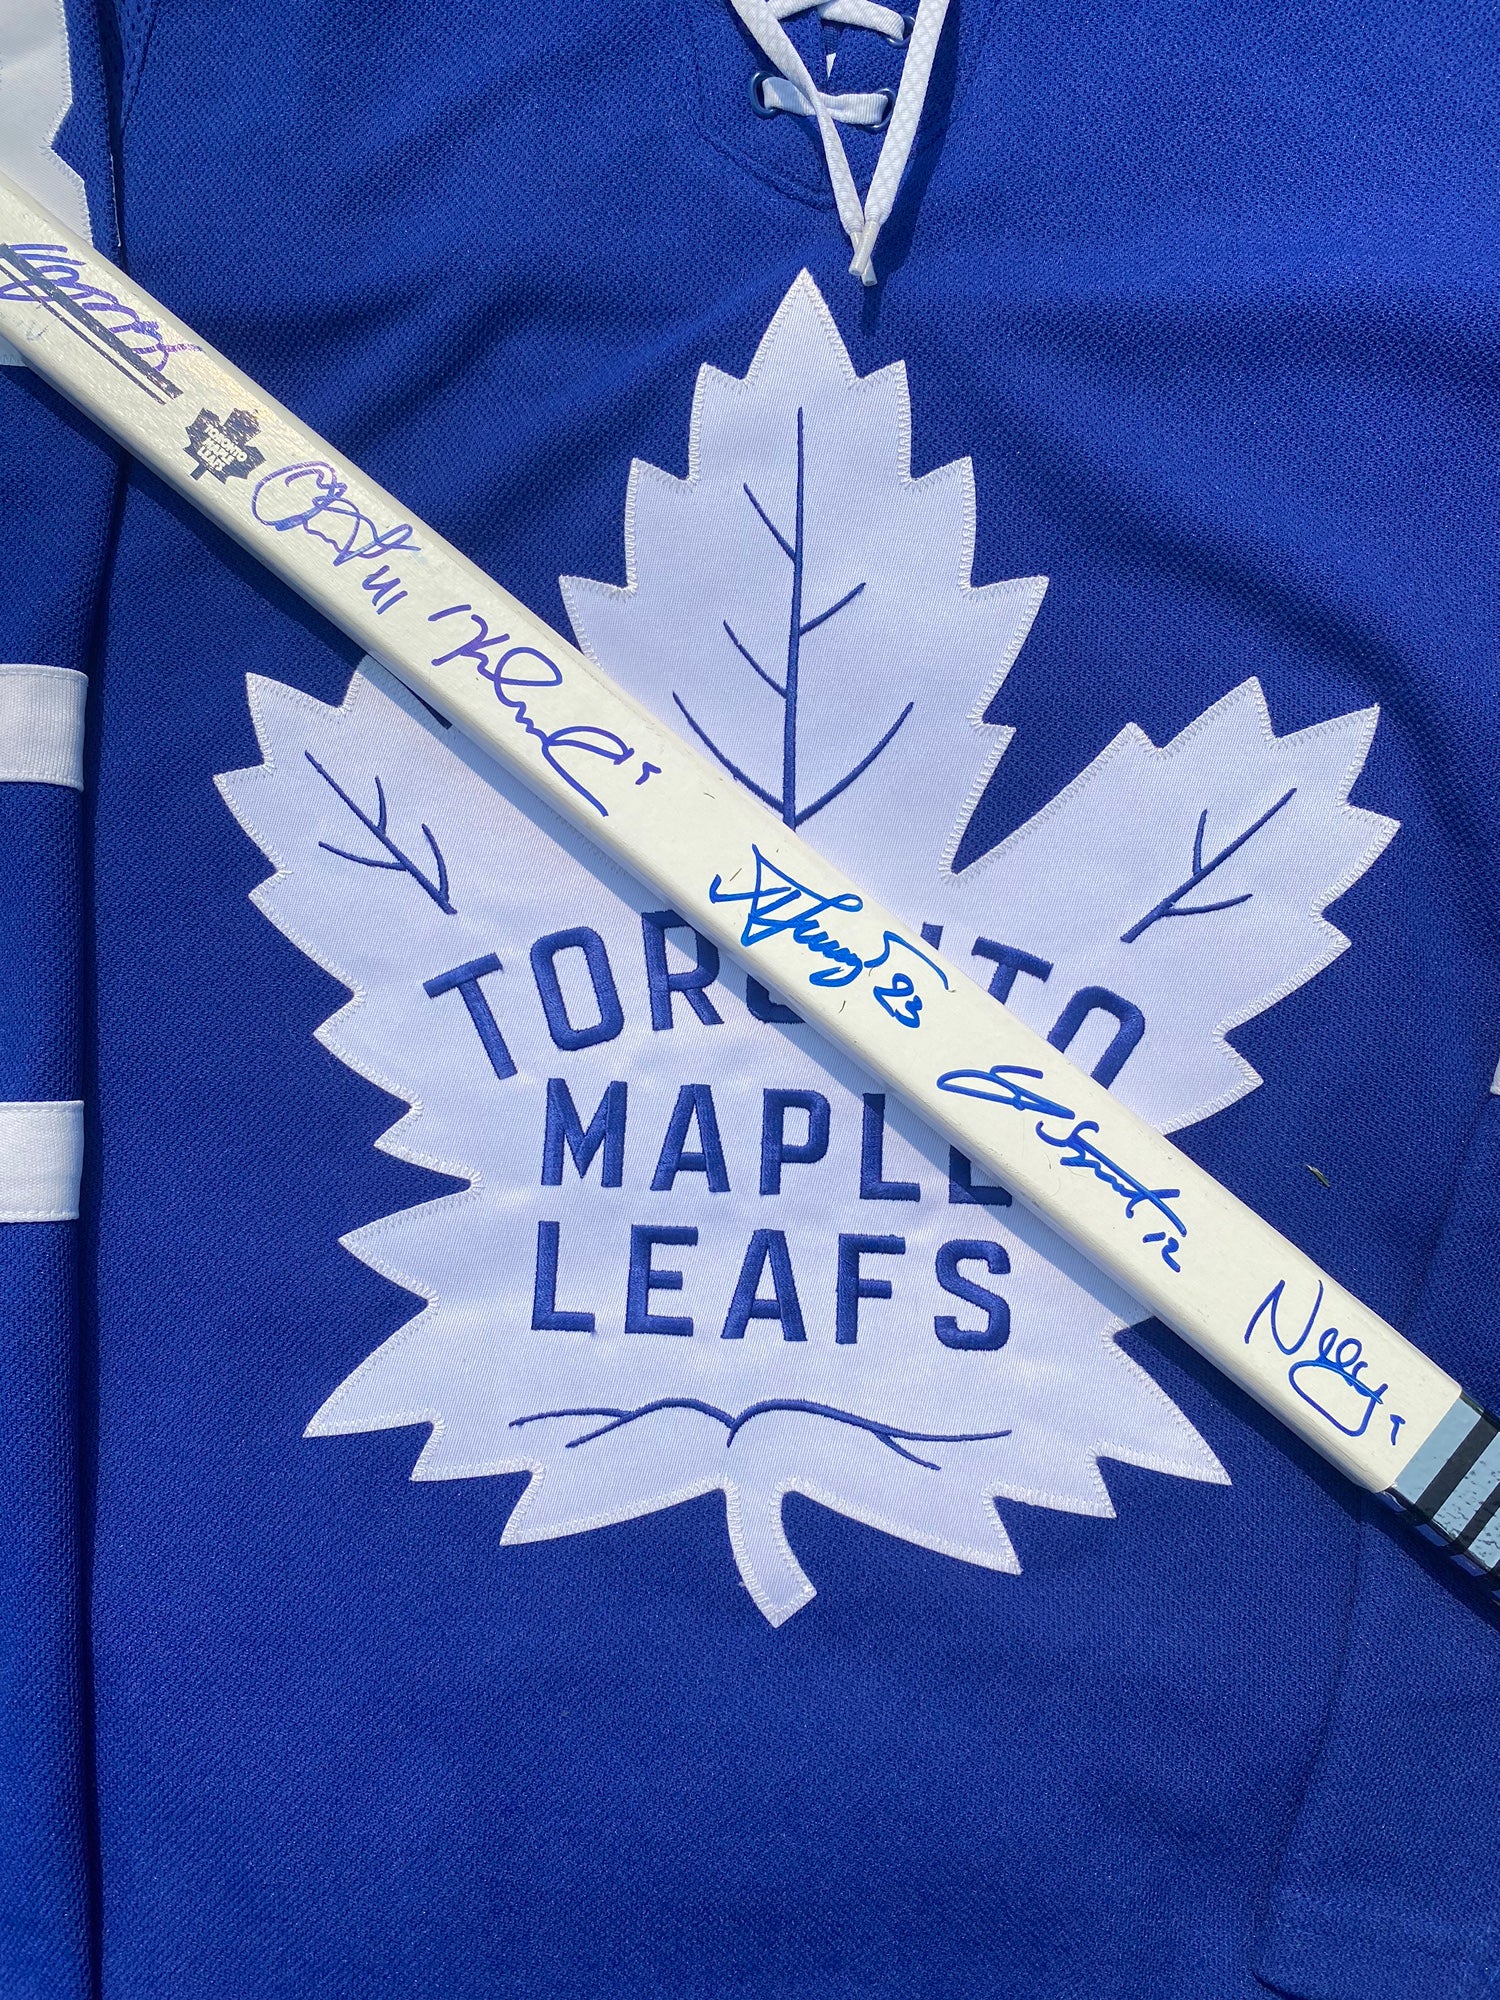 This Signed Edge x Toronto Maple Leafs Jersey is now available at